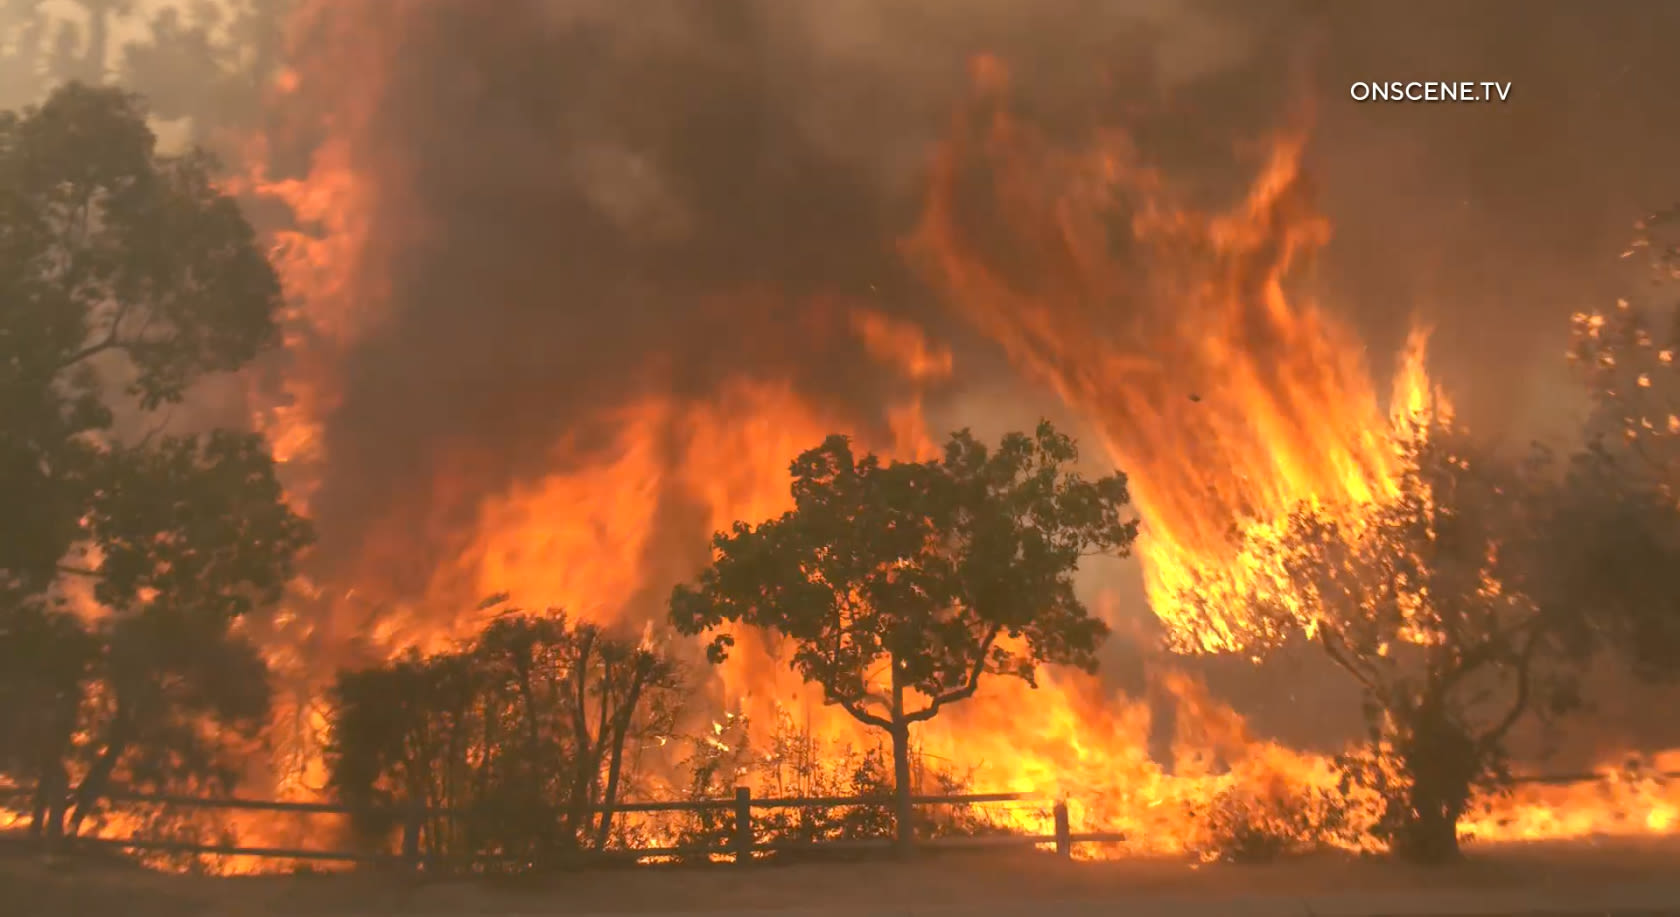 Hawarden fire burns structures, forces residents to flee in Riverside County